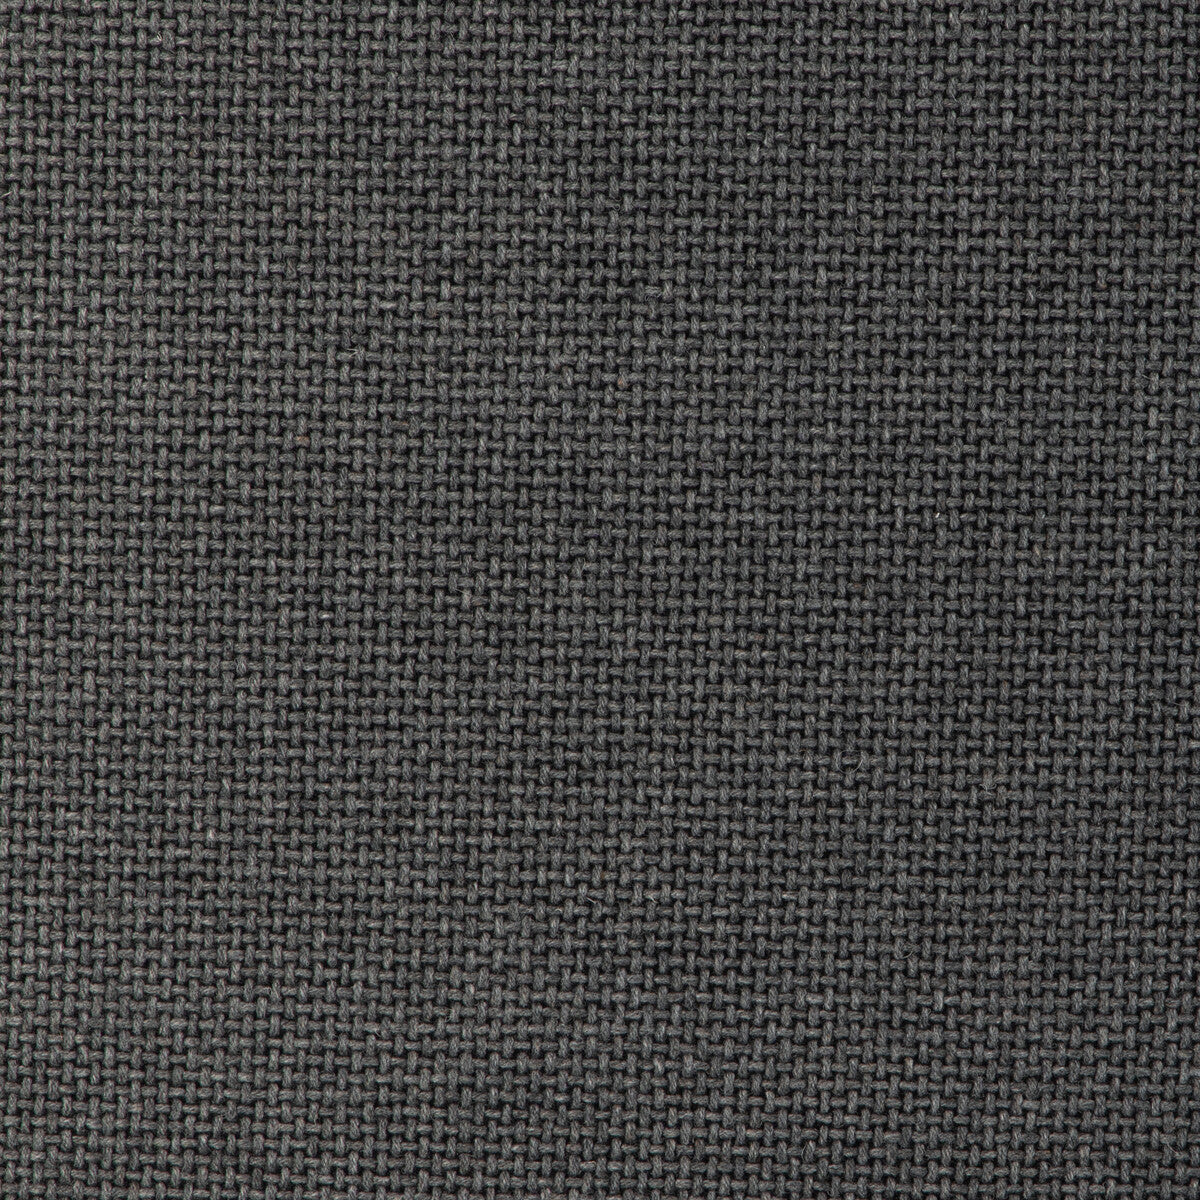 Easton Wool fabric in graphite color - pattern 37027.21.0 - by Kravet Contract